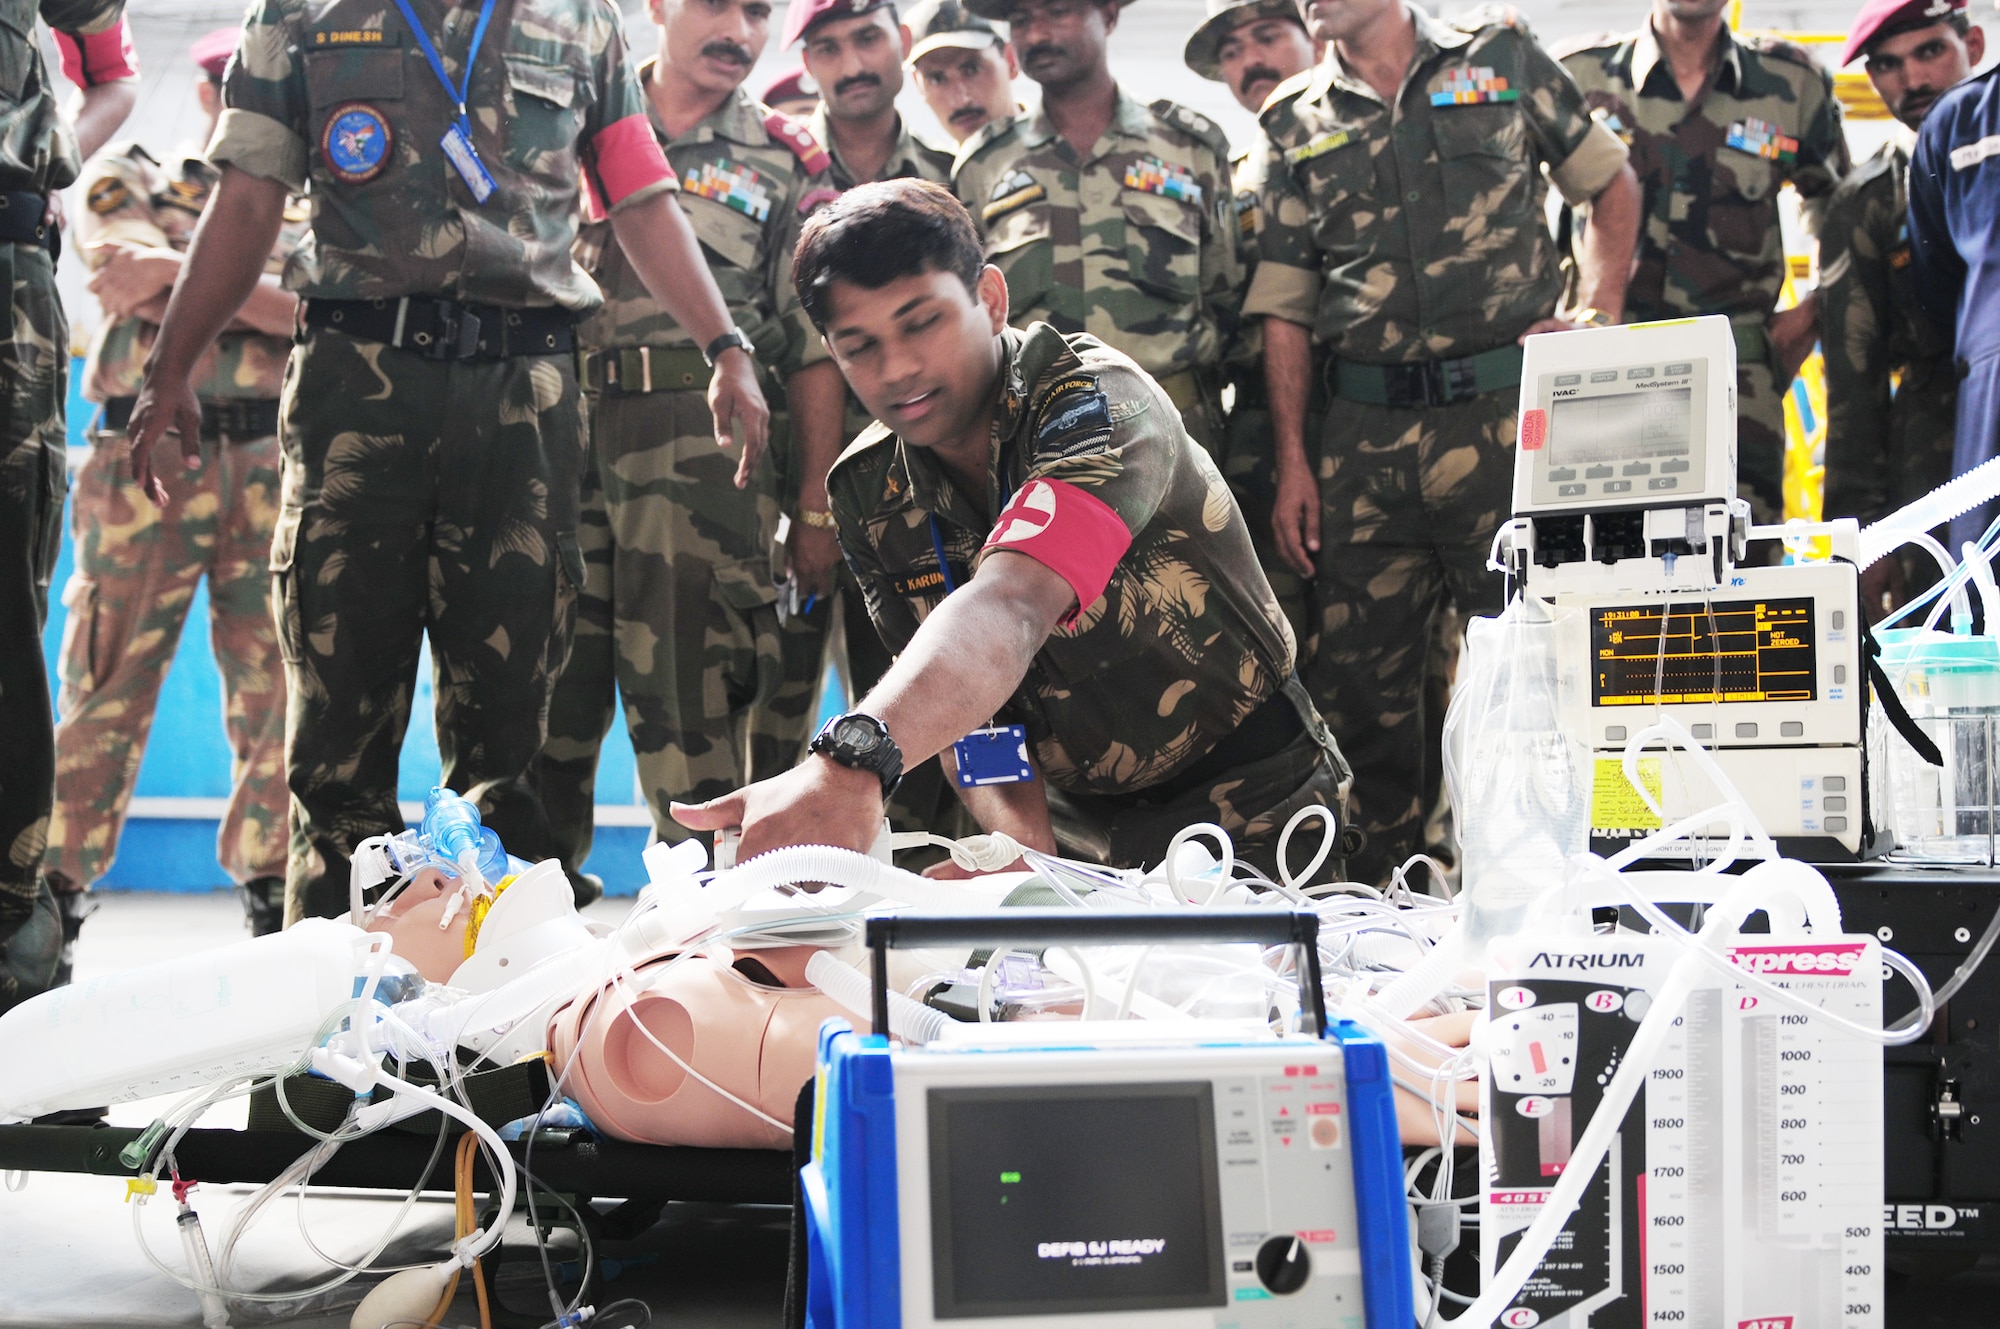 An Indian air force medic provides emergency response on a mannequin patient during a U.S. Air Force medical demonstration as part of exercise Cope India Oct. 21, 2009. Cope India is humanitarian assistance disaster relief exercise scheduled Oct. 19 to 23. (U.S. Air Force photo/Capt. Genieve David)